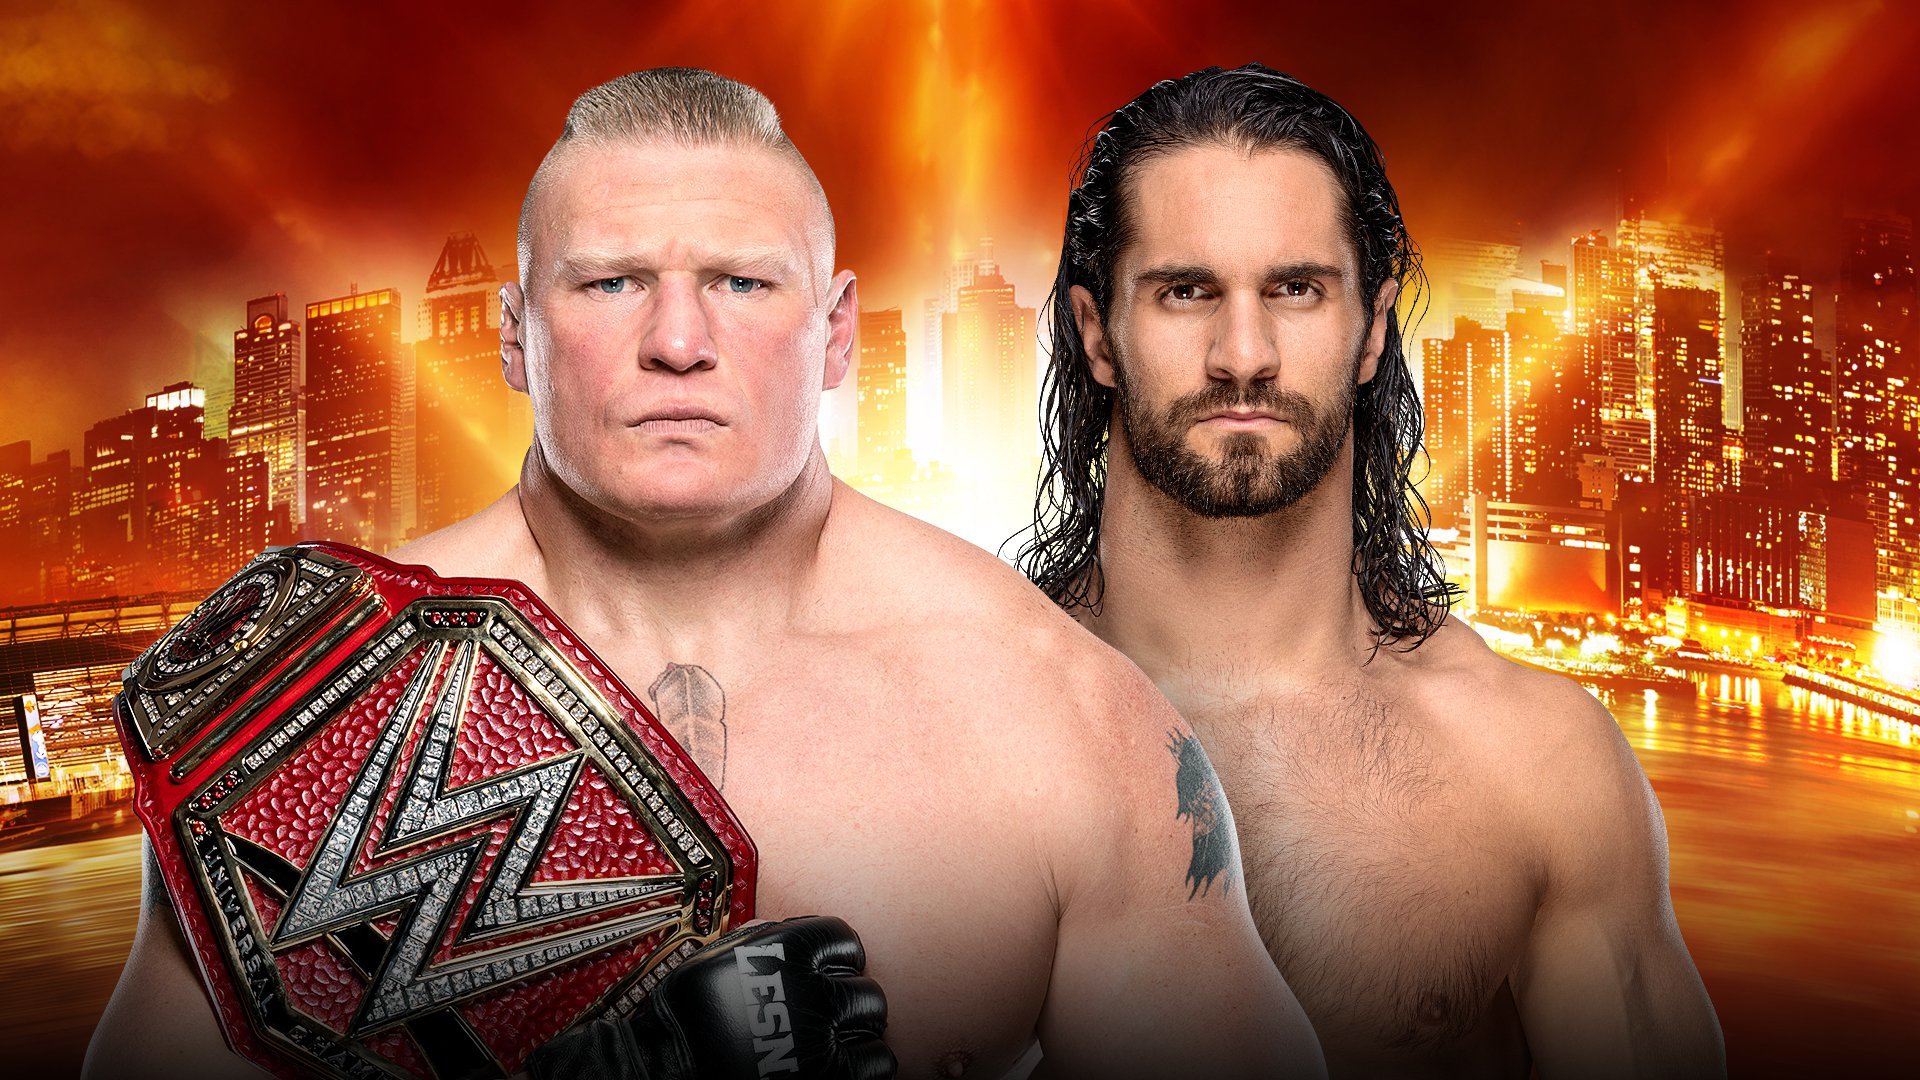 WWE WrestleMania 2019 Results: Reviewing Top Highlights and Low